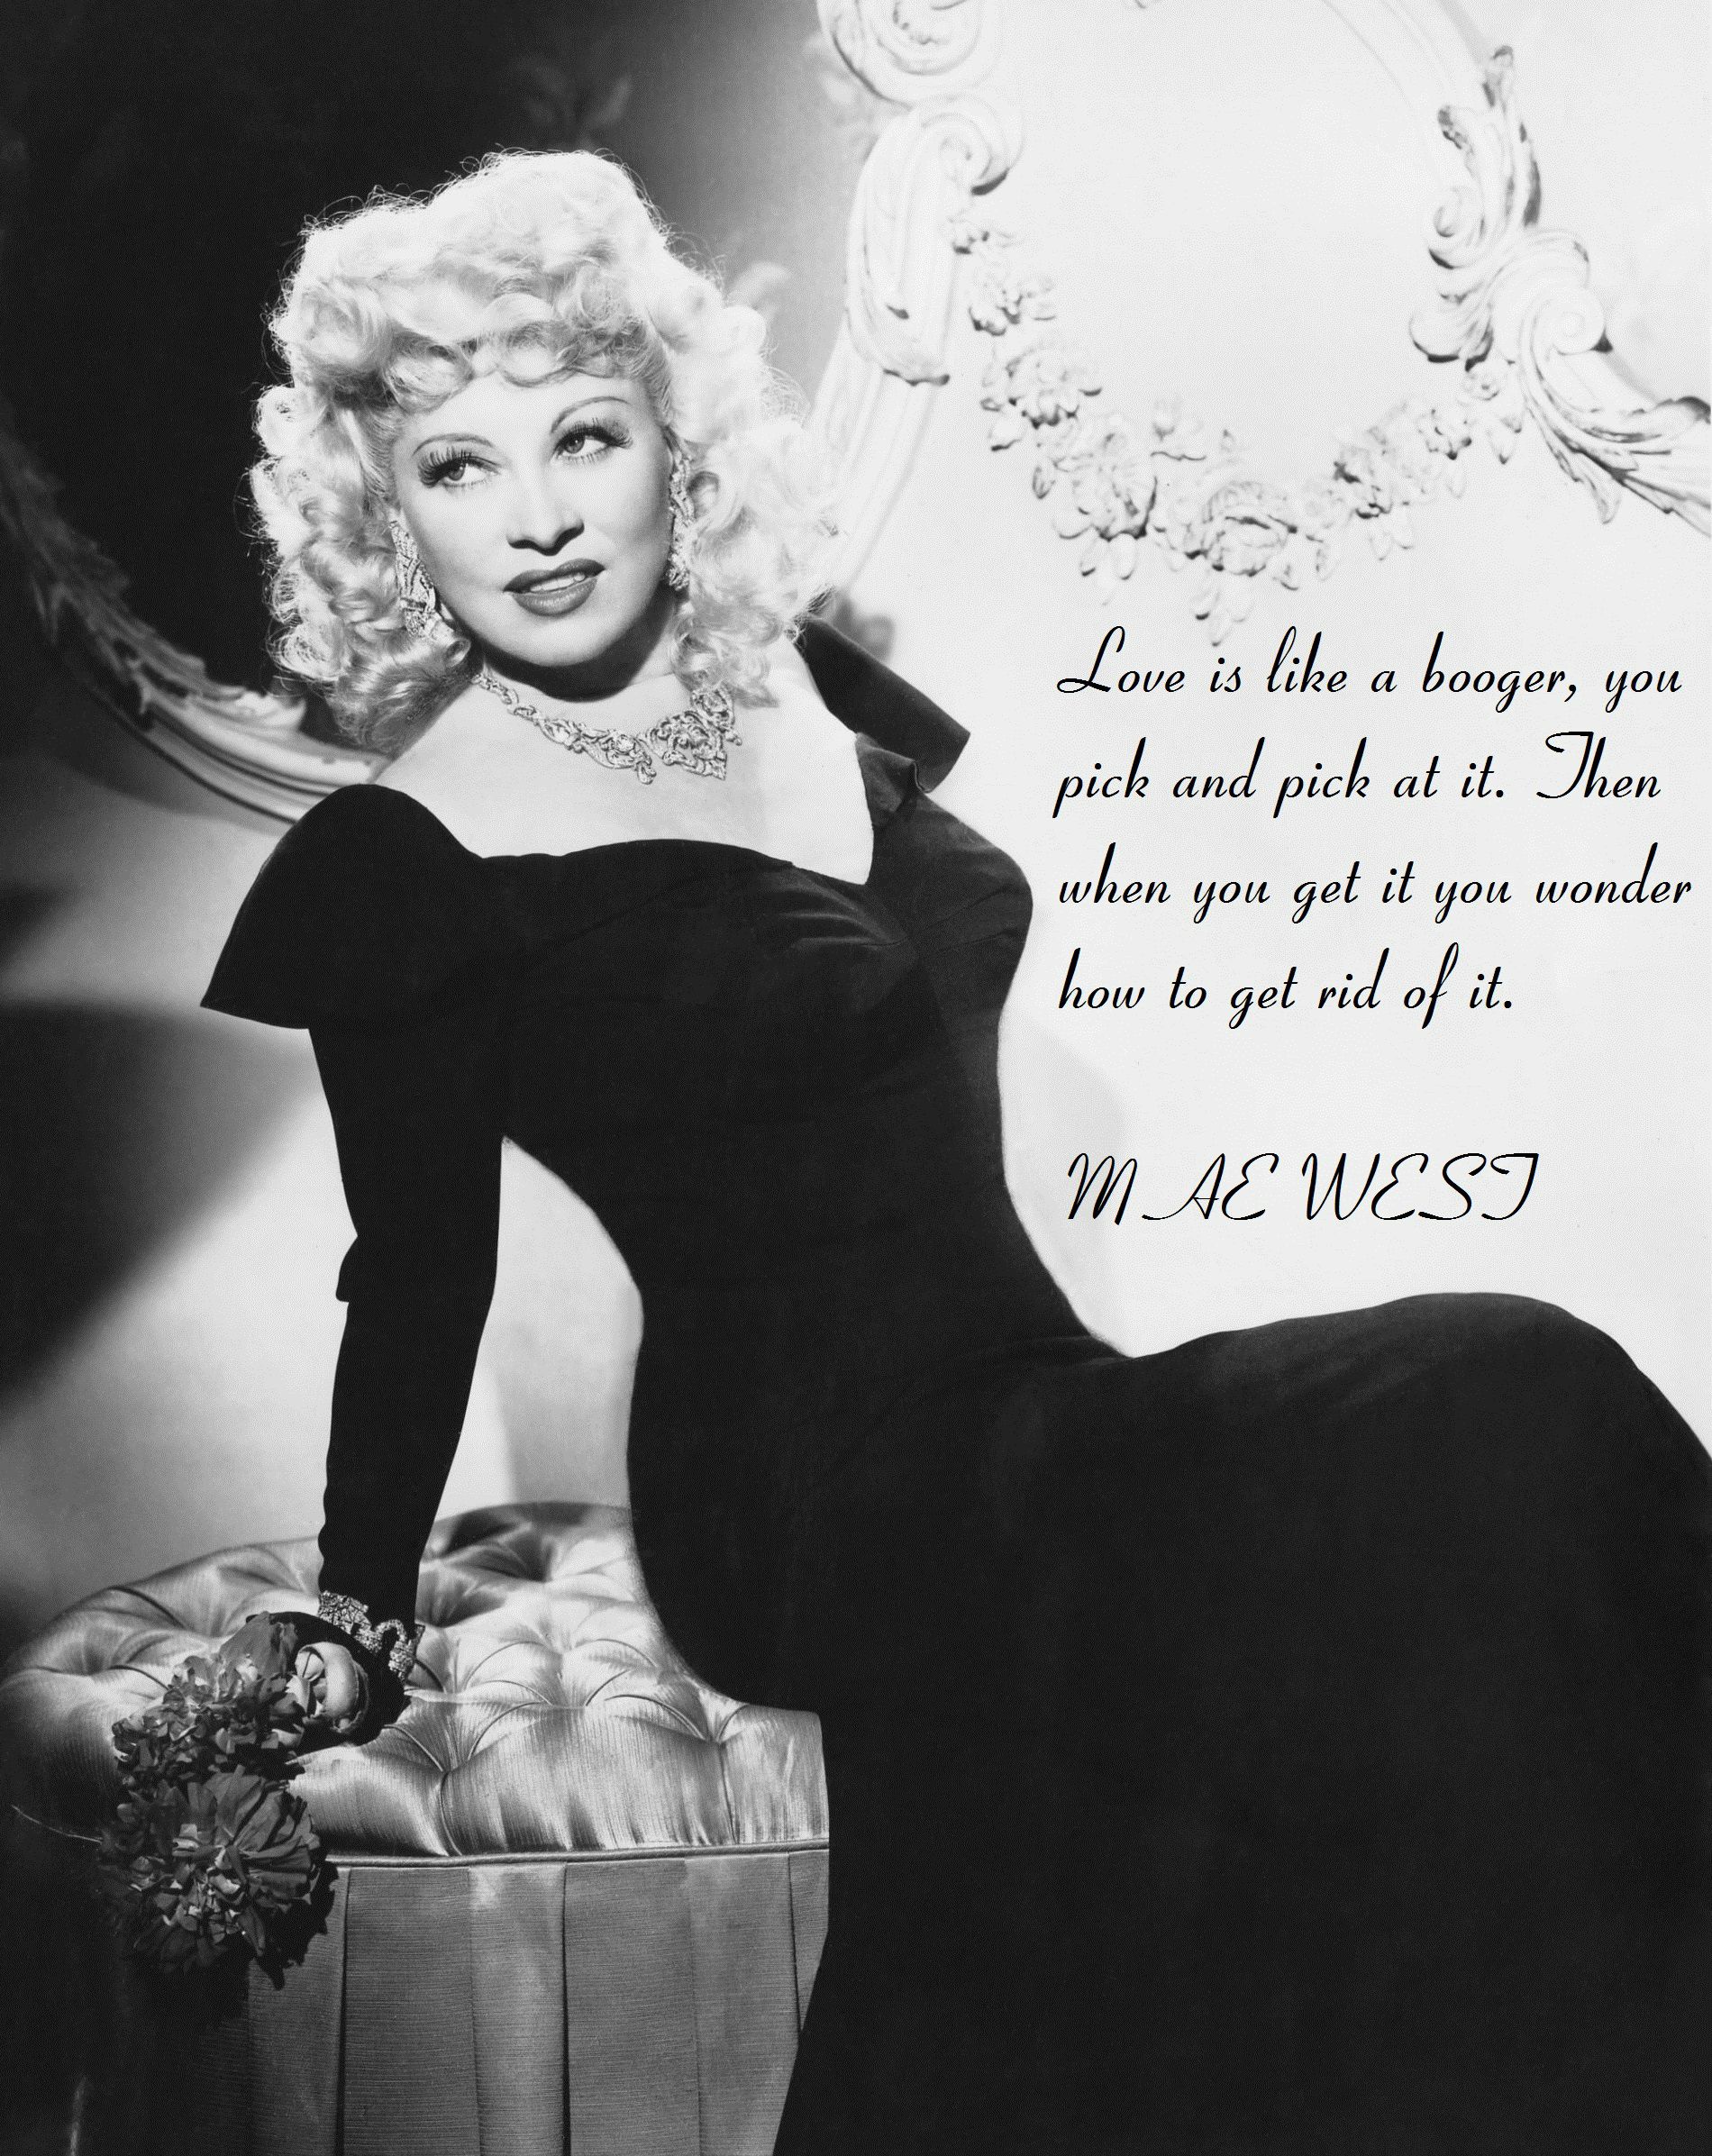 Mae West Quotes And Sayings. QuotesGram